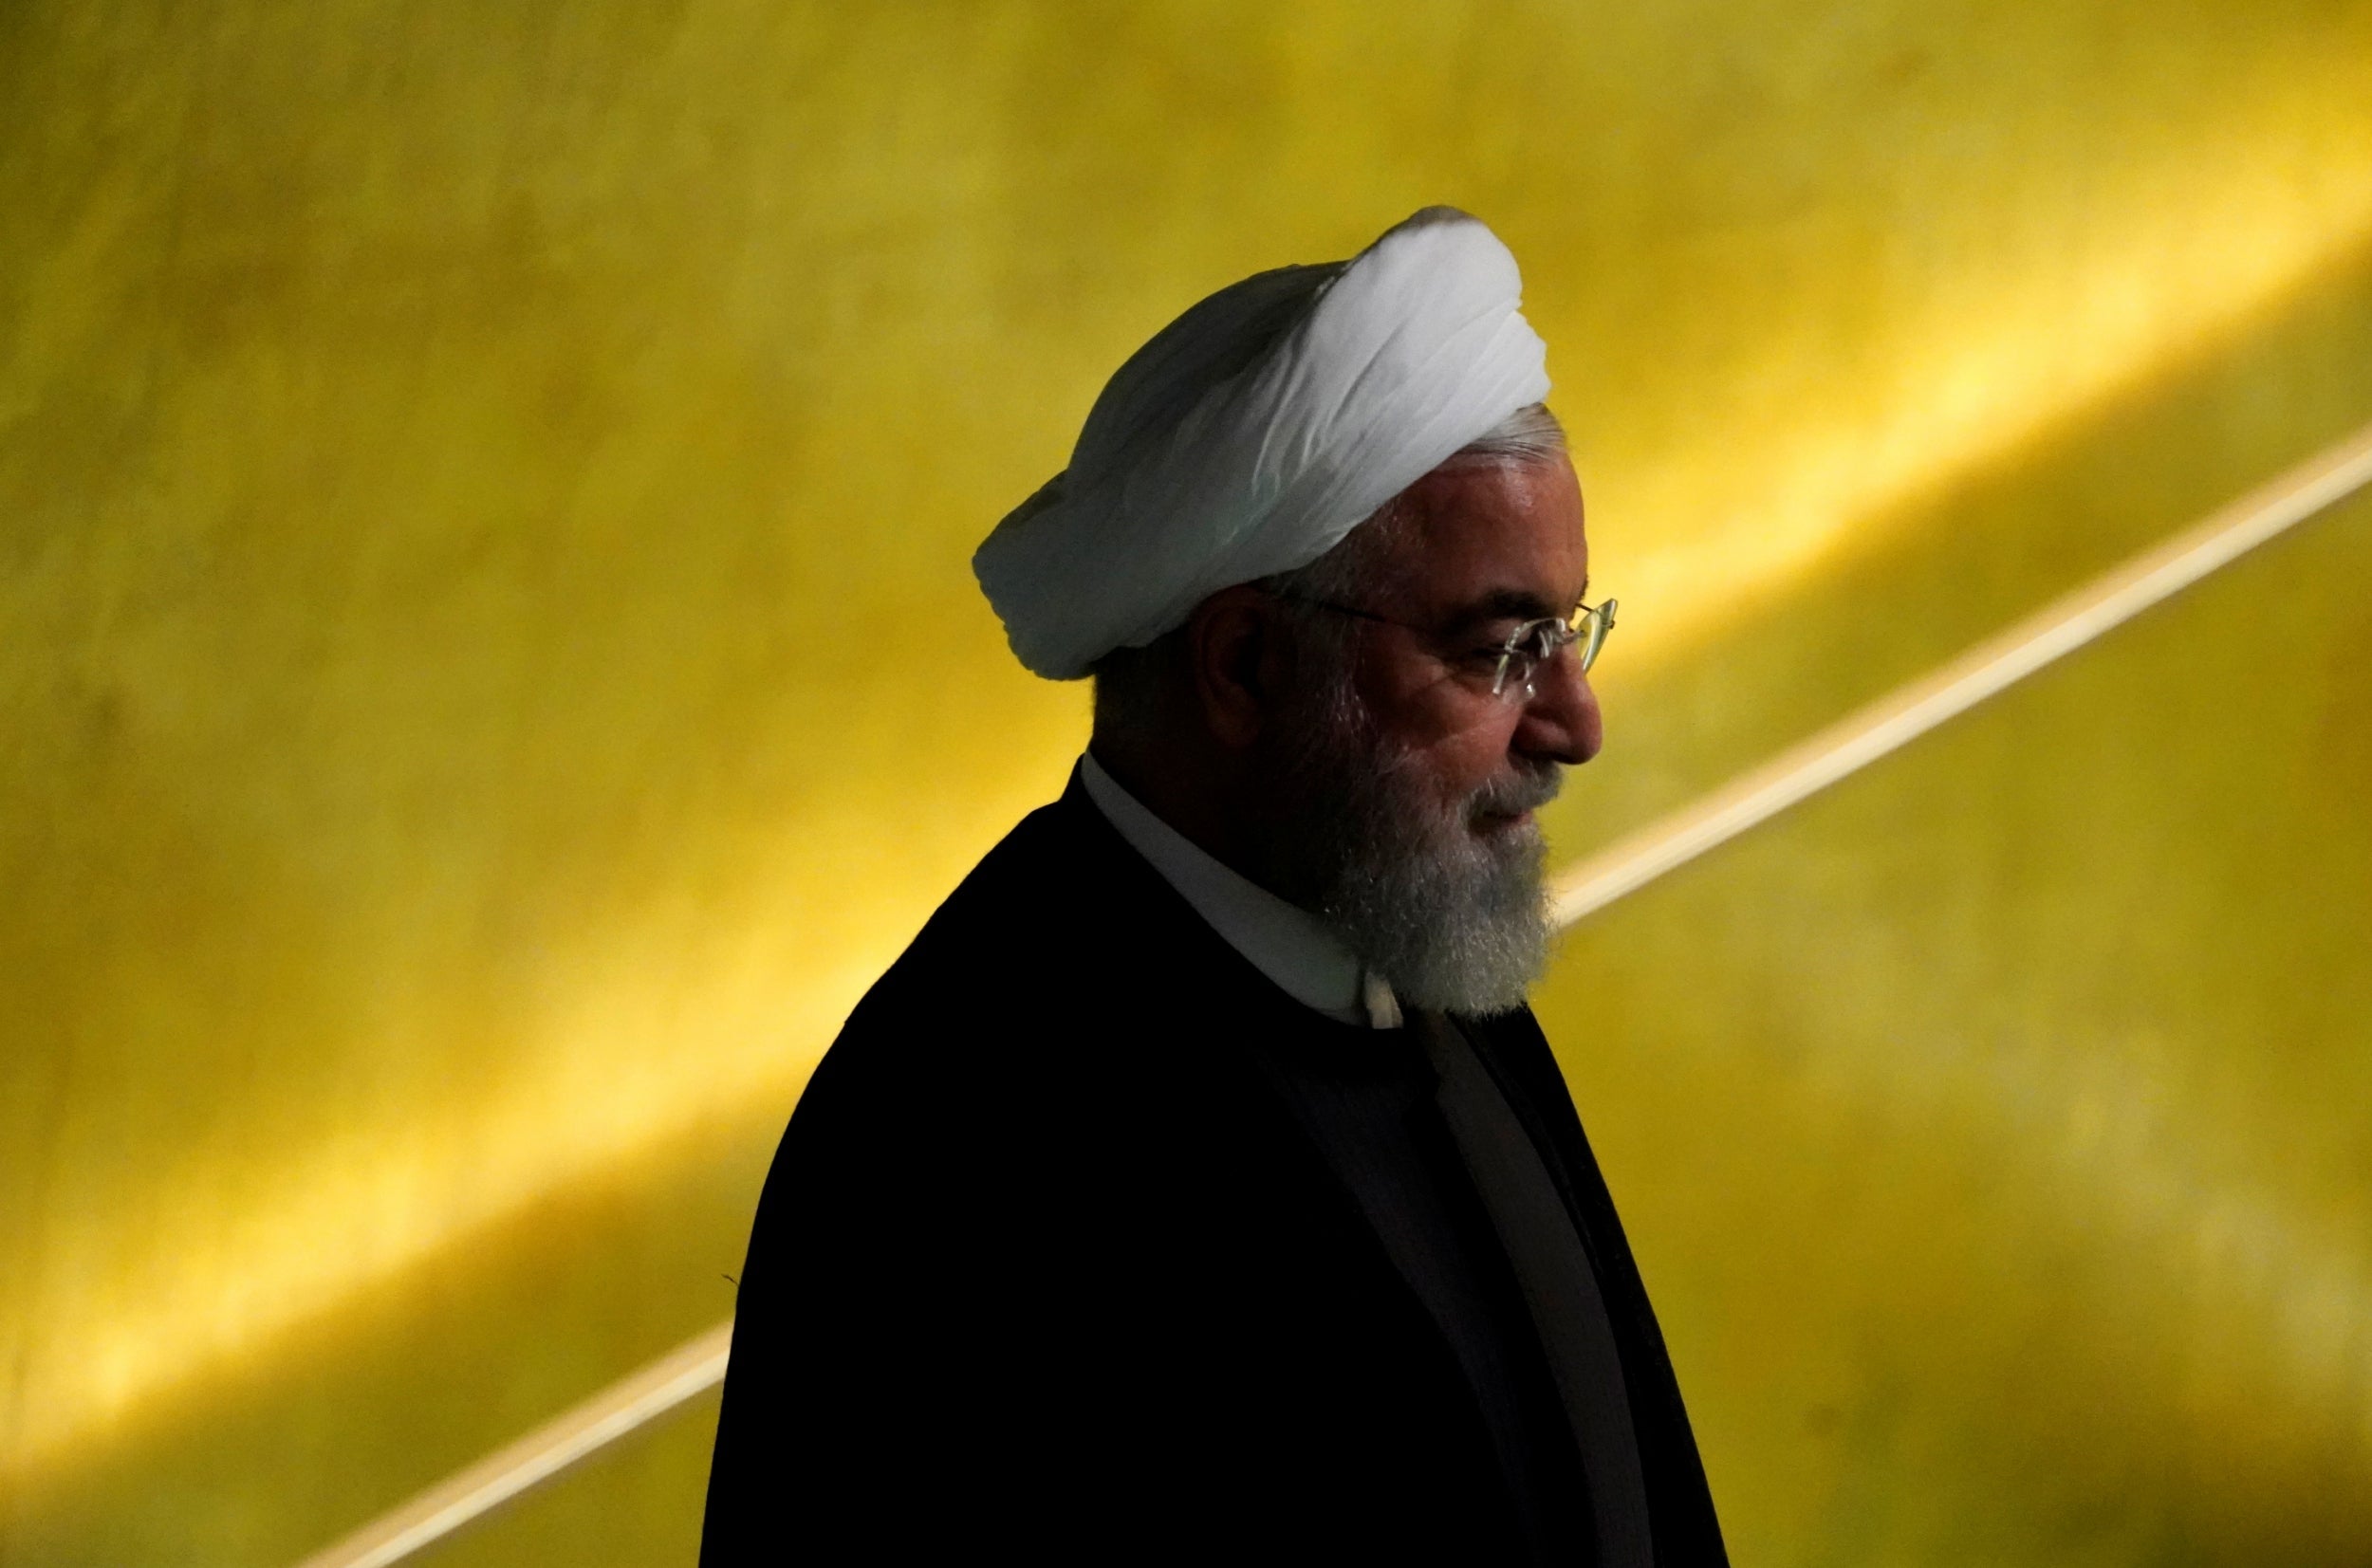 Iran president Hassan Rouhani at the United Nations general assembly